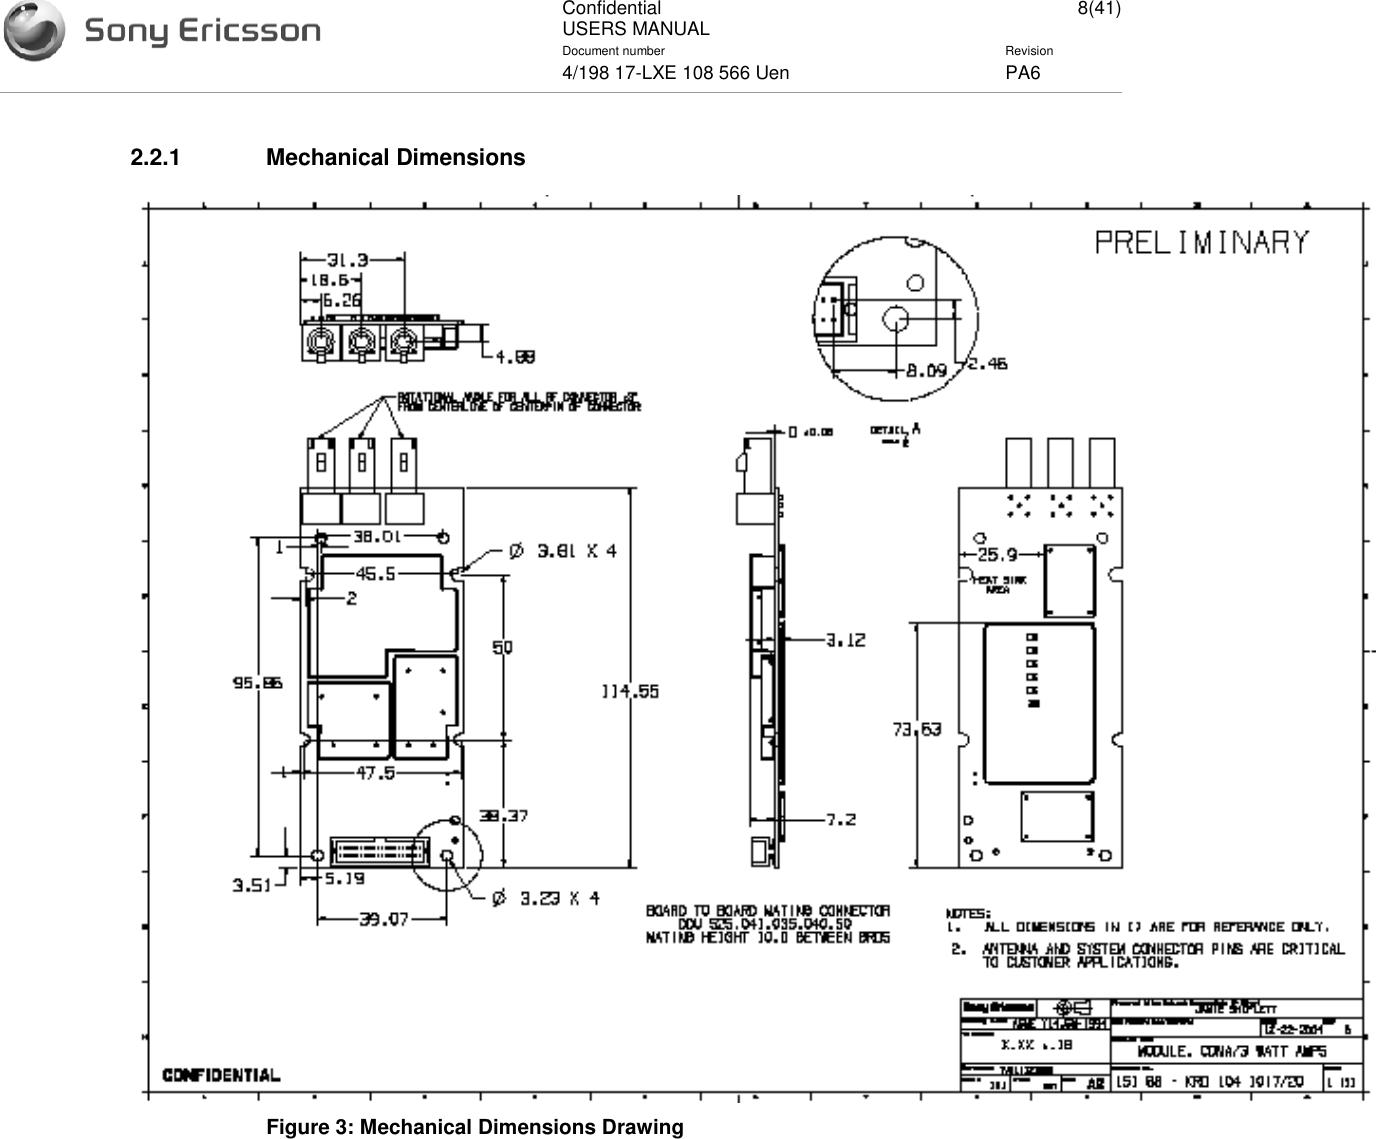 ConfidentialUSERS MANUAL 8(41)Document number Revision4/198 17-LXE 108 566 Uen PA62.2.1 Mechanical DimensionsFigure 3: Mechanical Dimensions Drawing